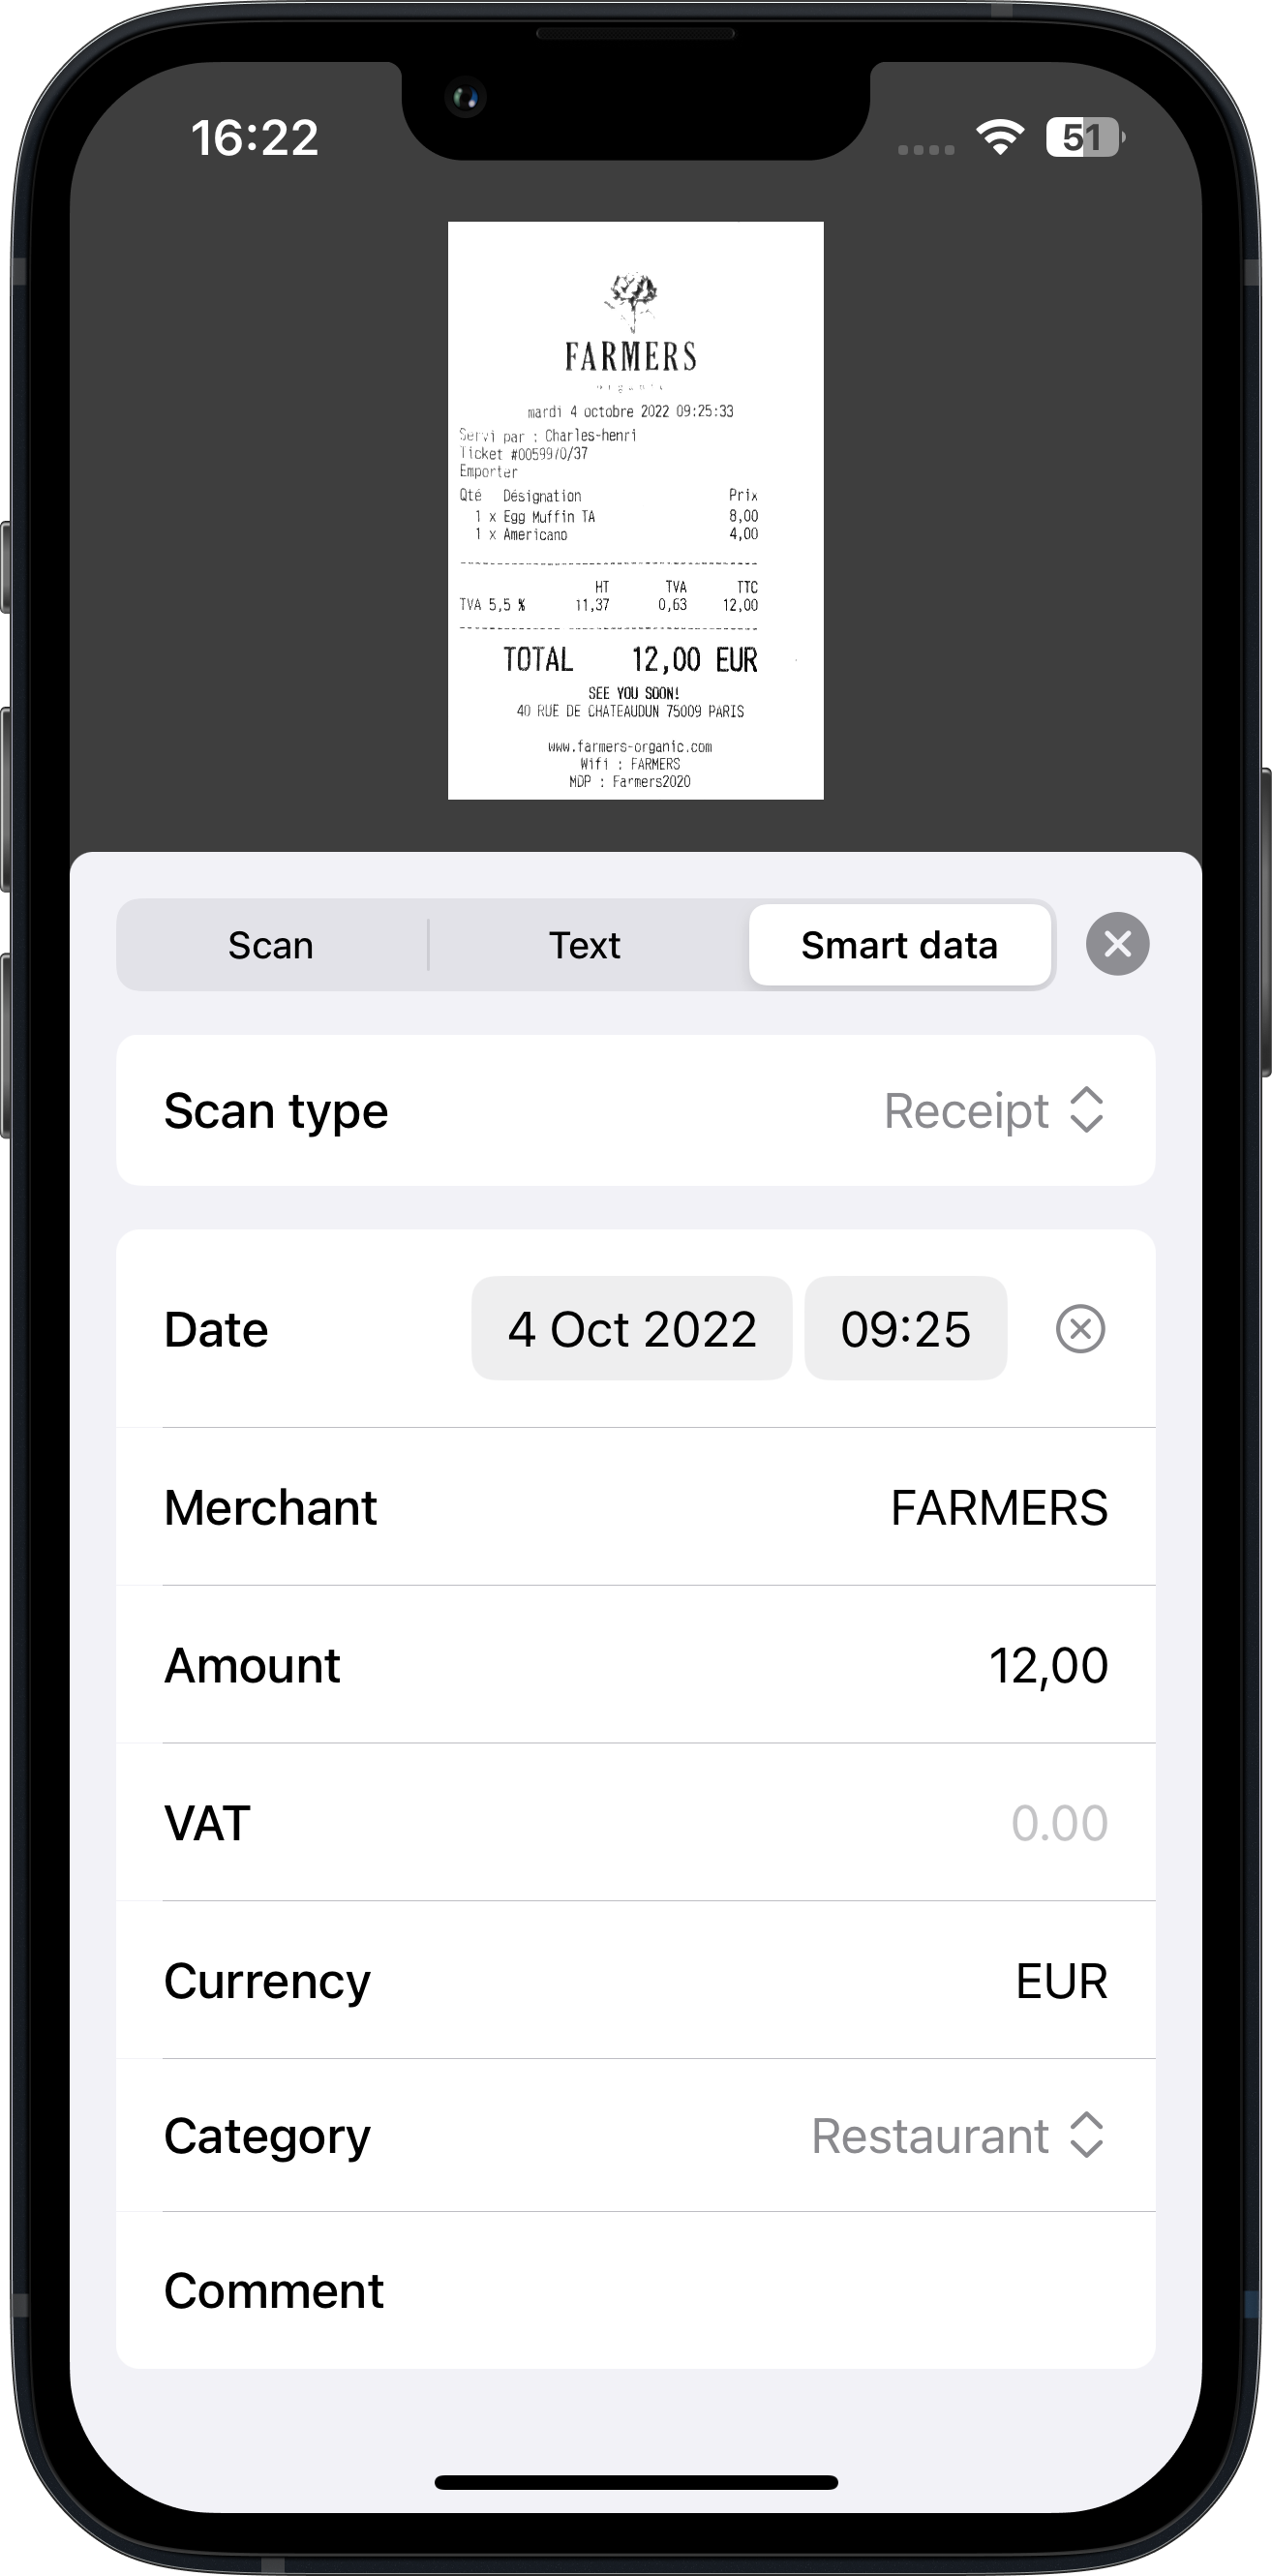 Details of a receipt automatically generated into an expense report by Genius Scan on iOS device